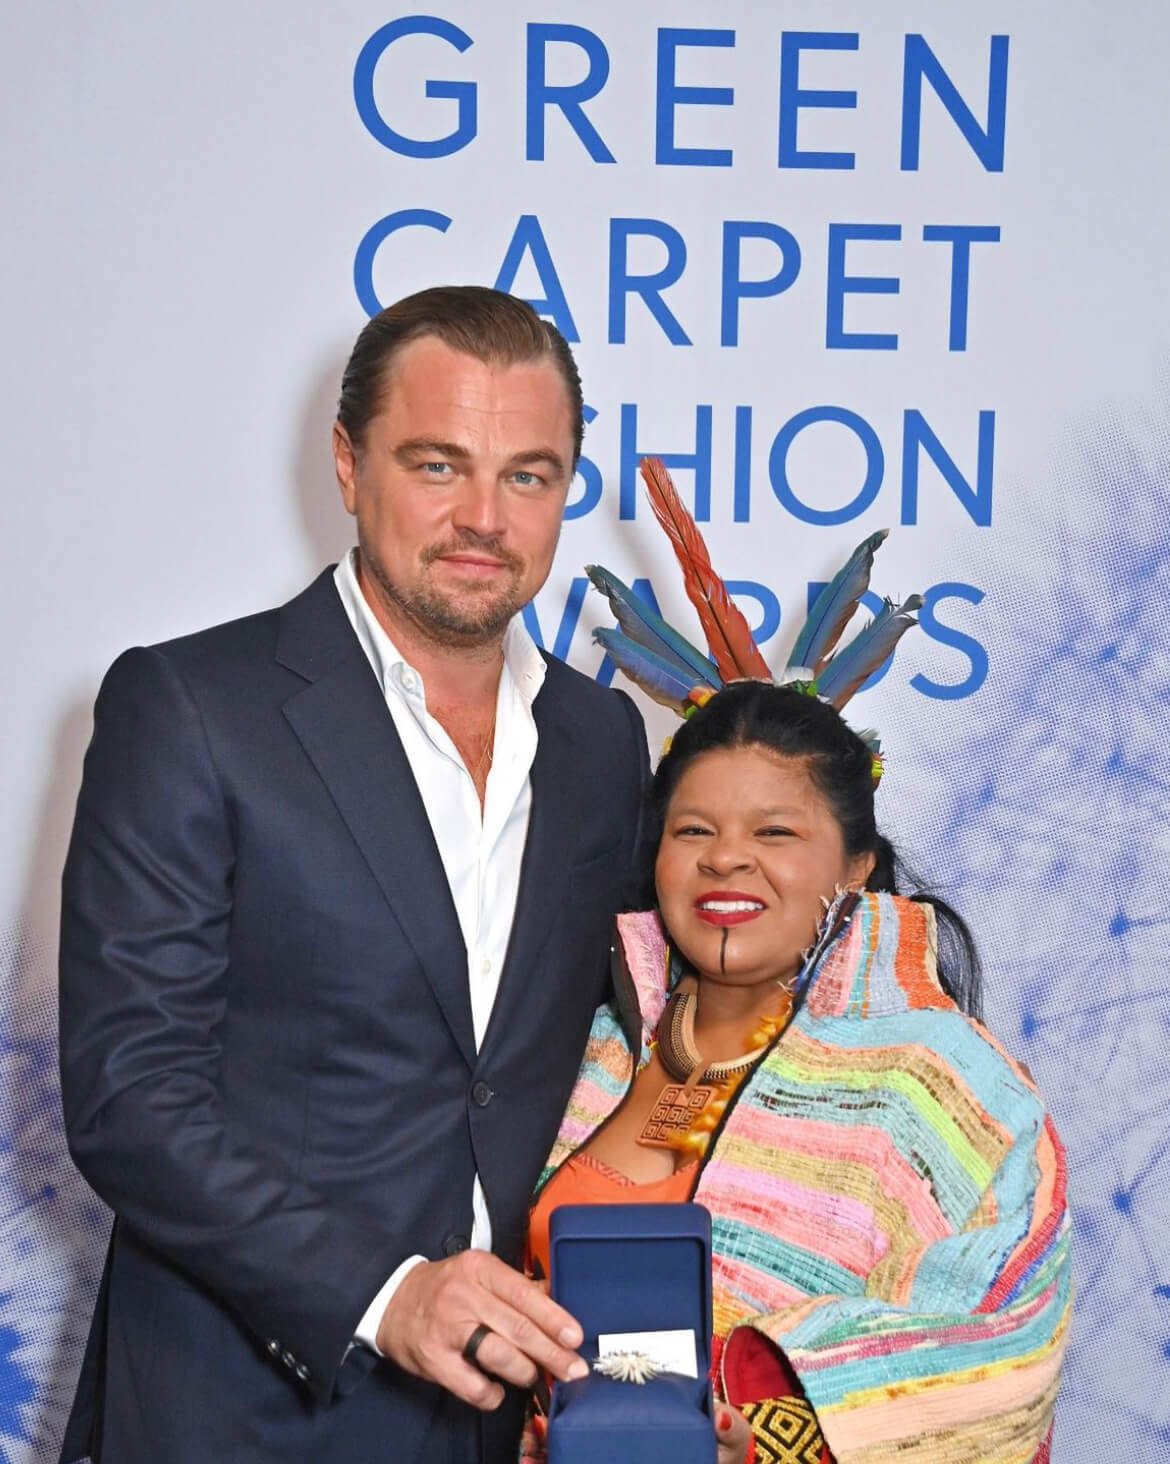 DiCaprio presented the Healer Award to Brazil's first-ever Minister of Indigenous Peoples, Sonia Guajajara, a heroic guardian of planet.